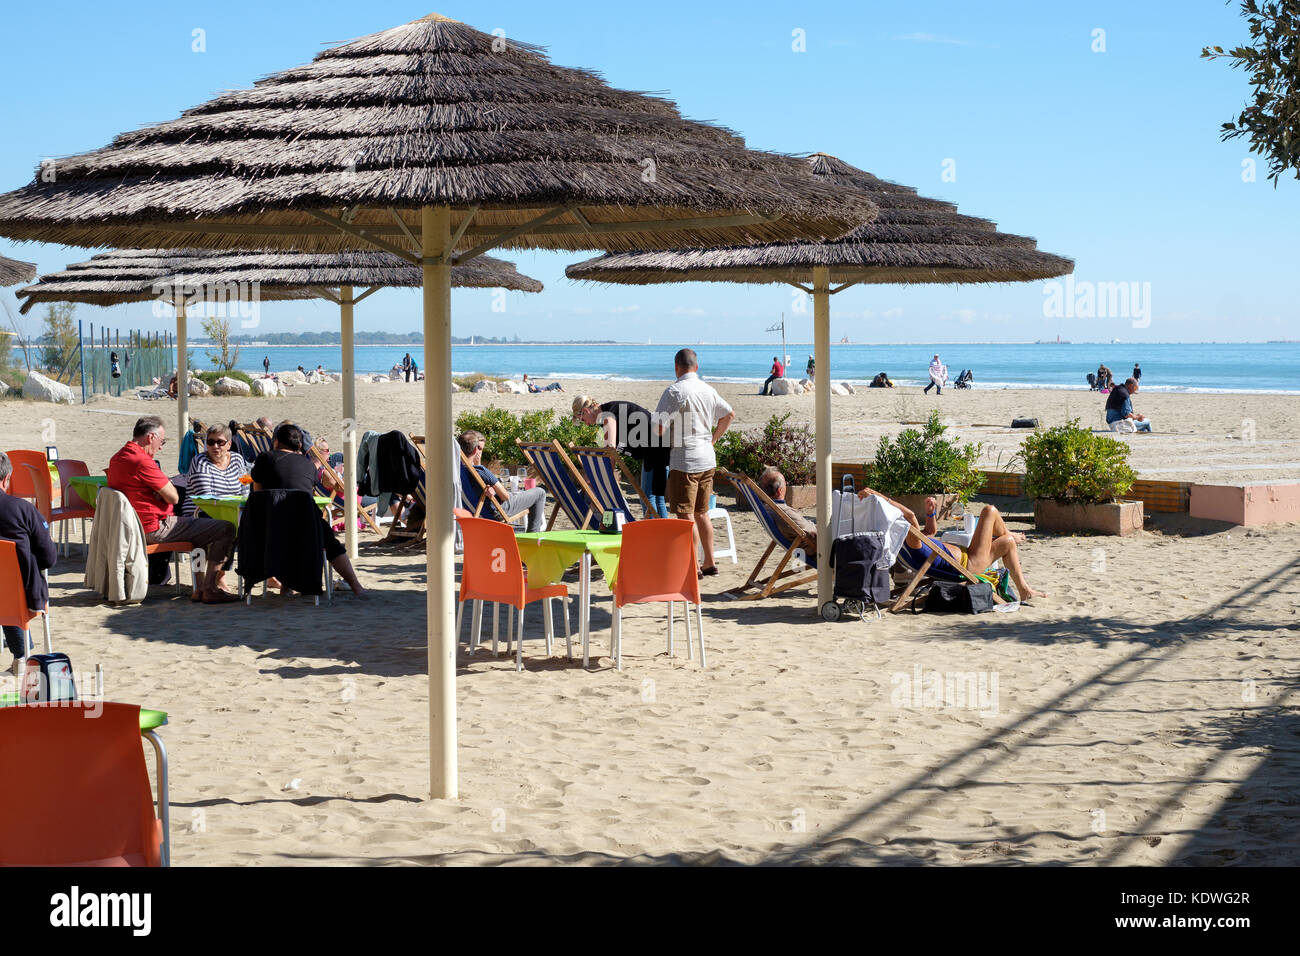 People relaxing at the Blue Moon snack bar on the beach, Venice Lido, Venice, Italy Stock Photo